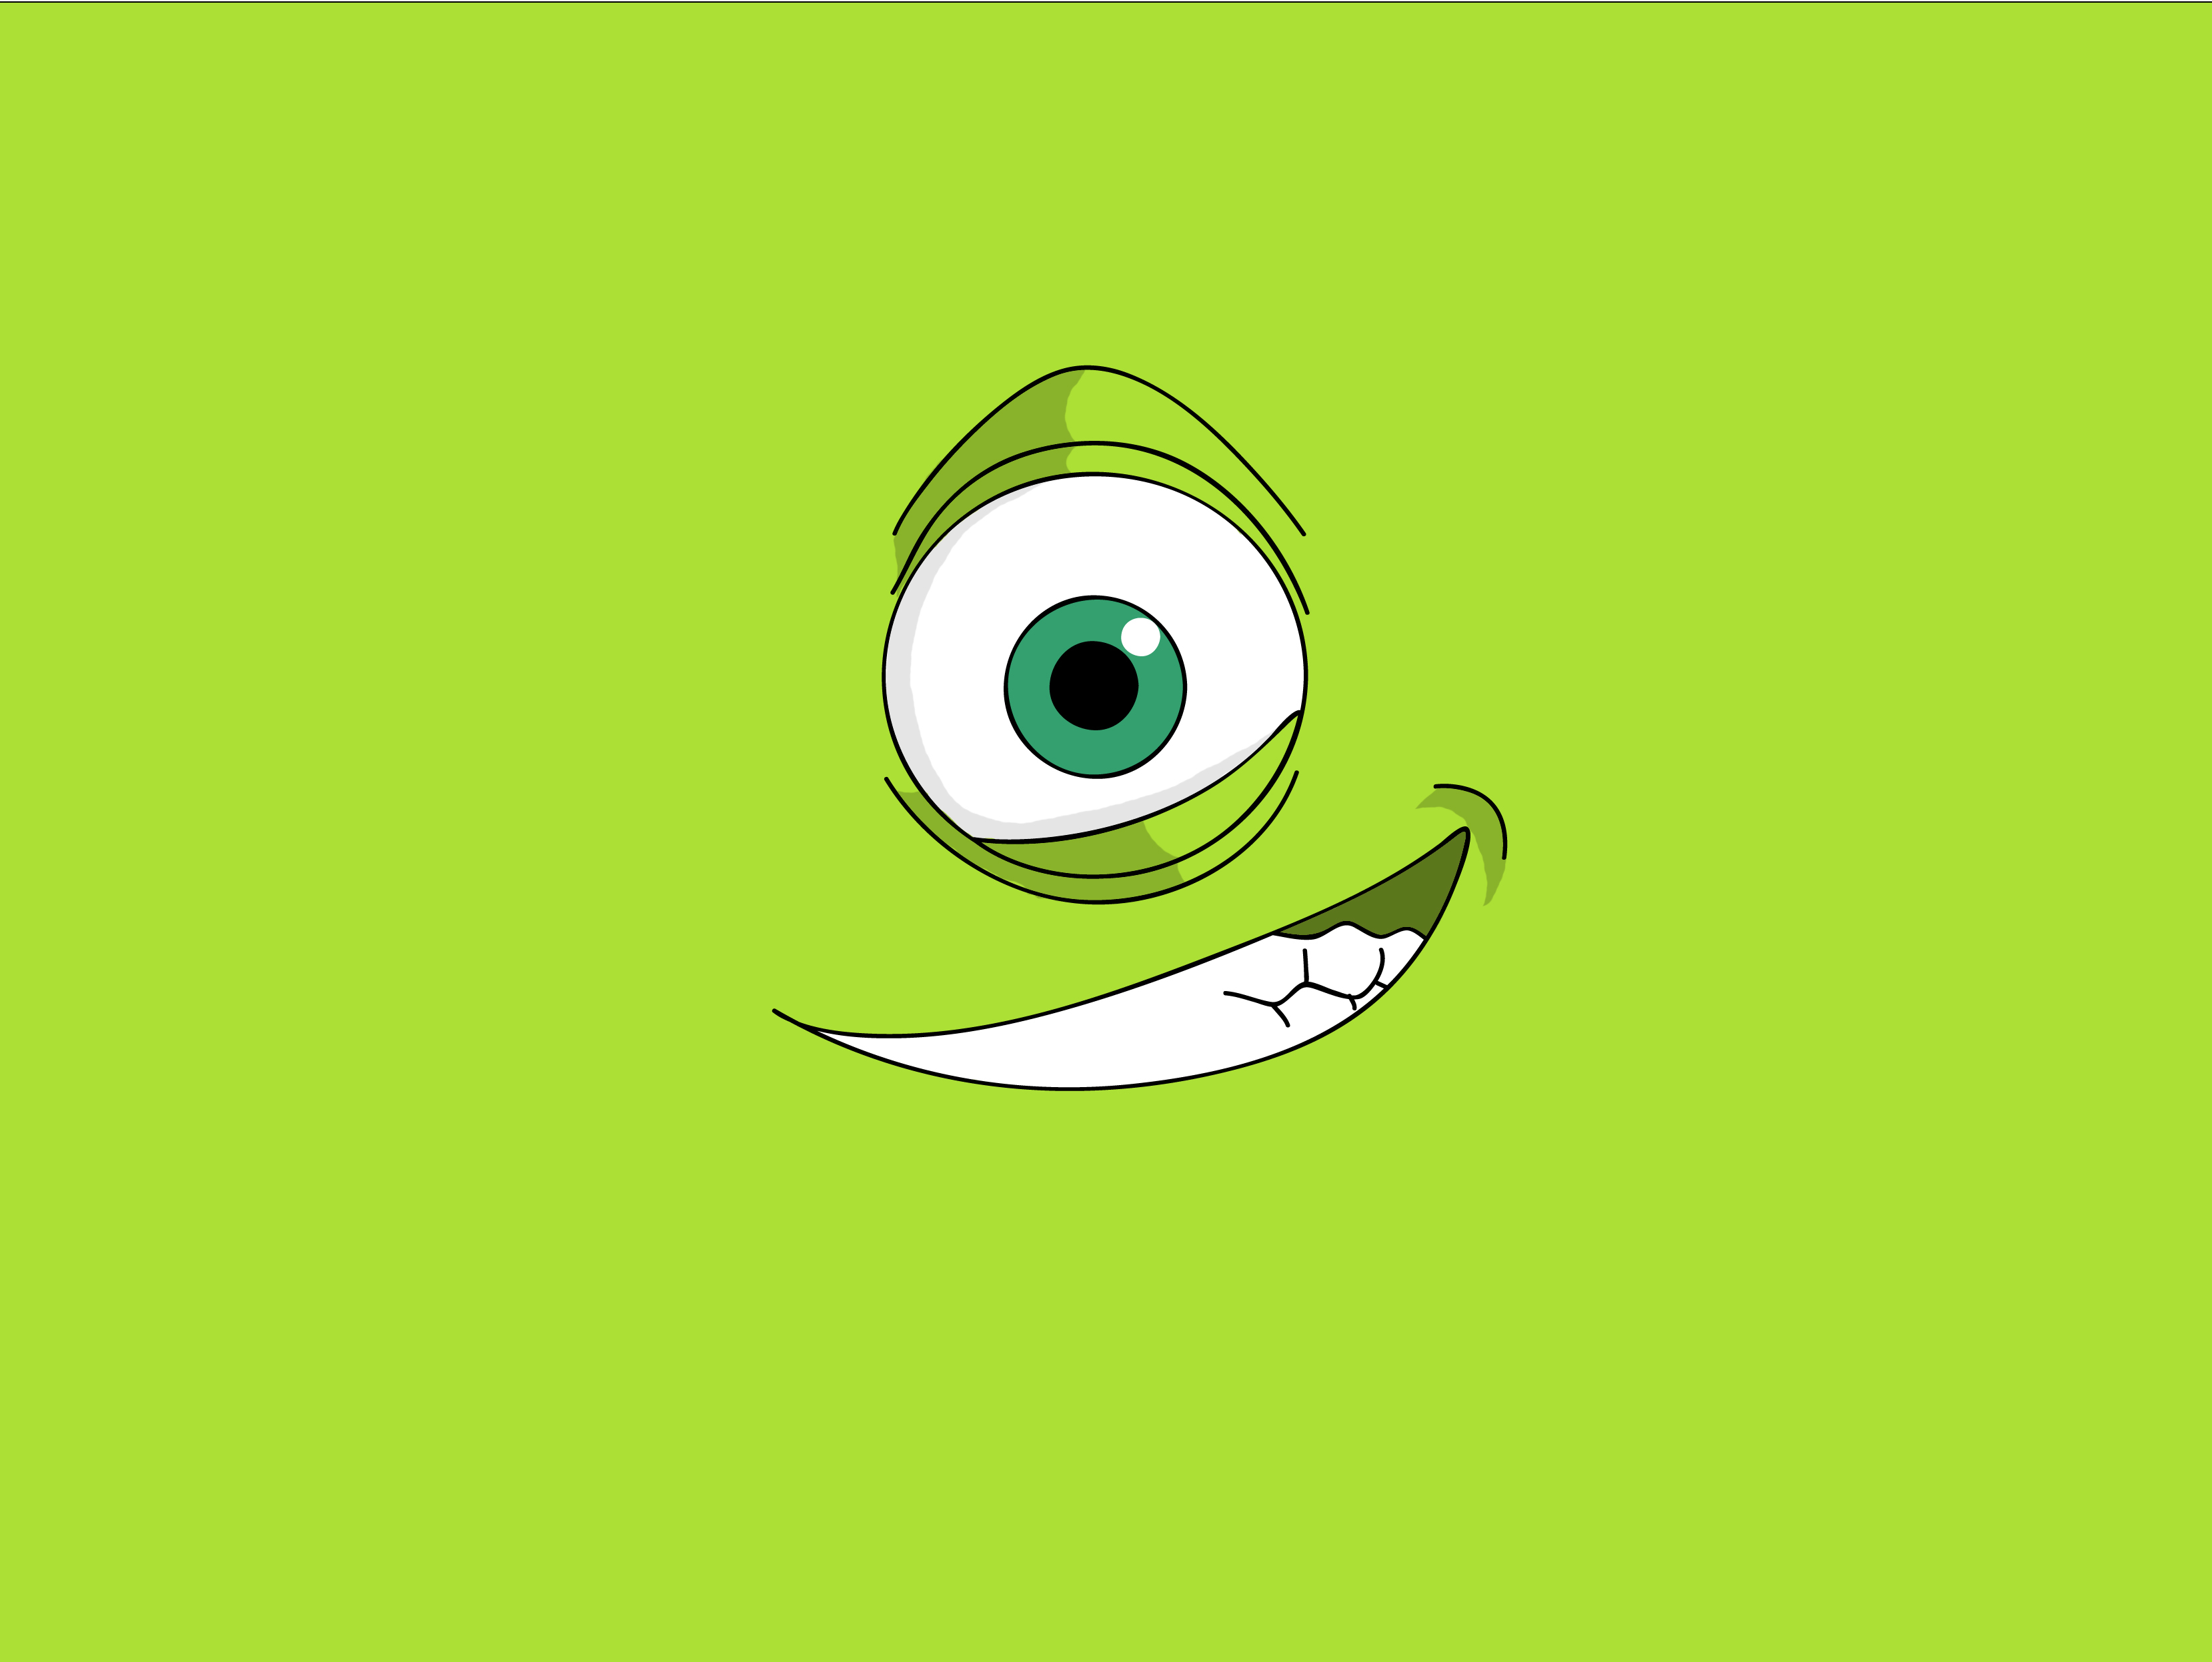 Green Background And Big Eye Wallpaper For Android - Monsters Inc Mike  Cartoon - 1920x1408 Wallpaper 